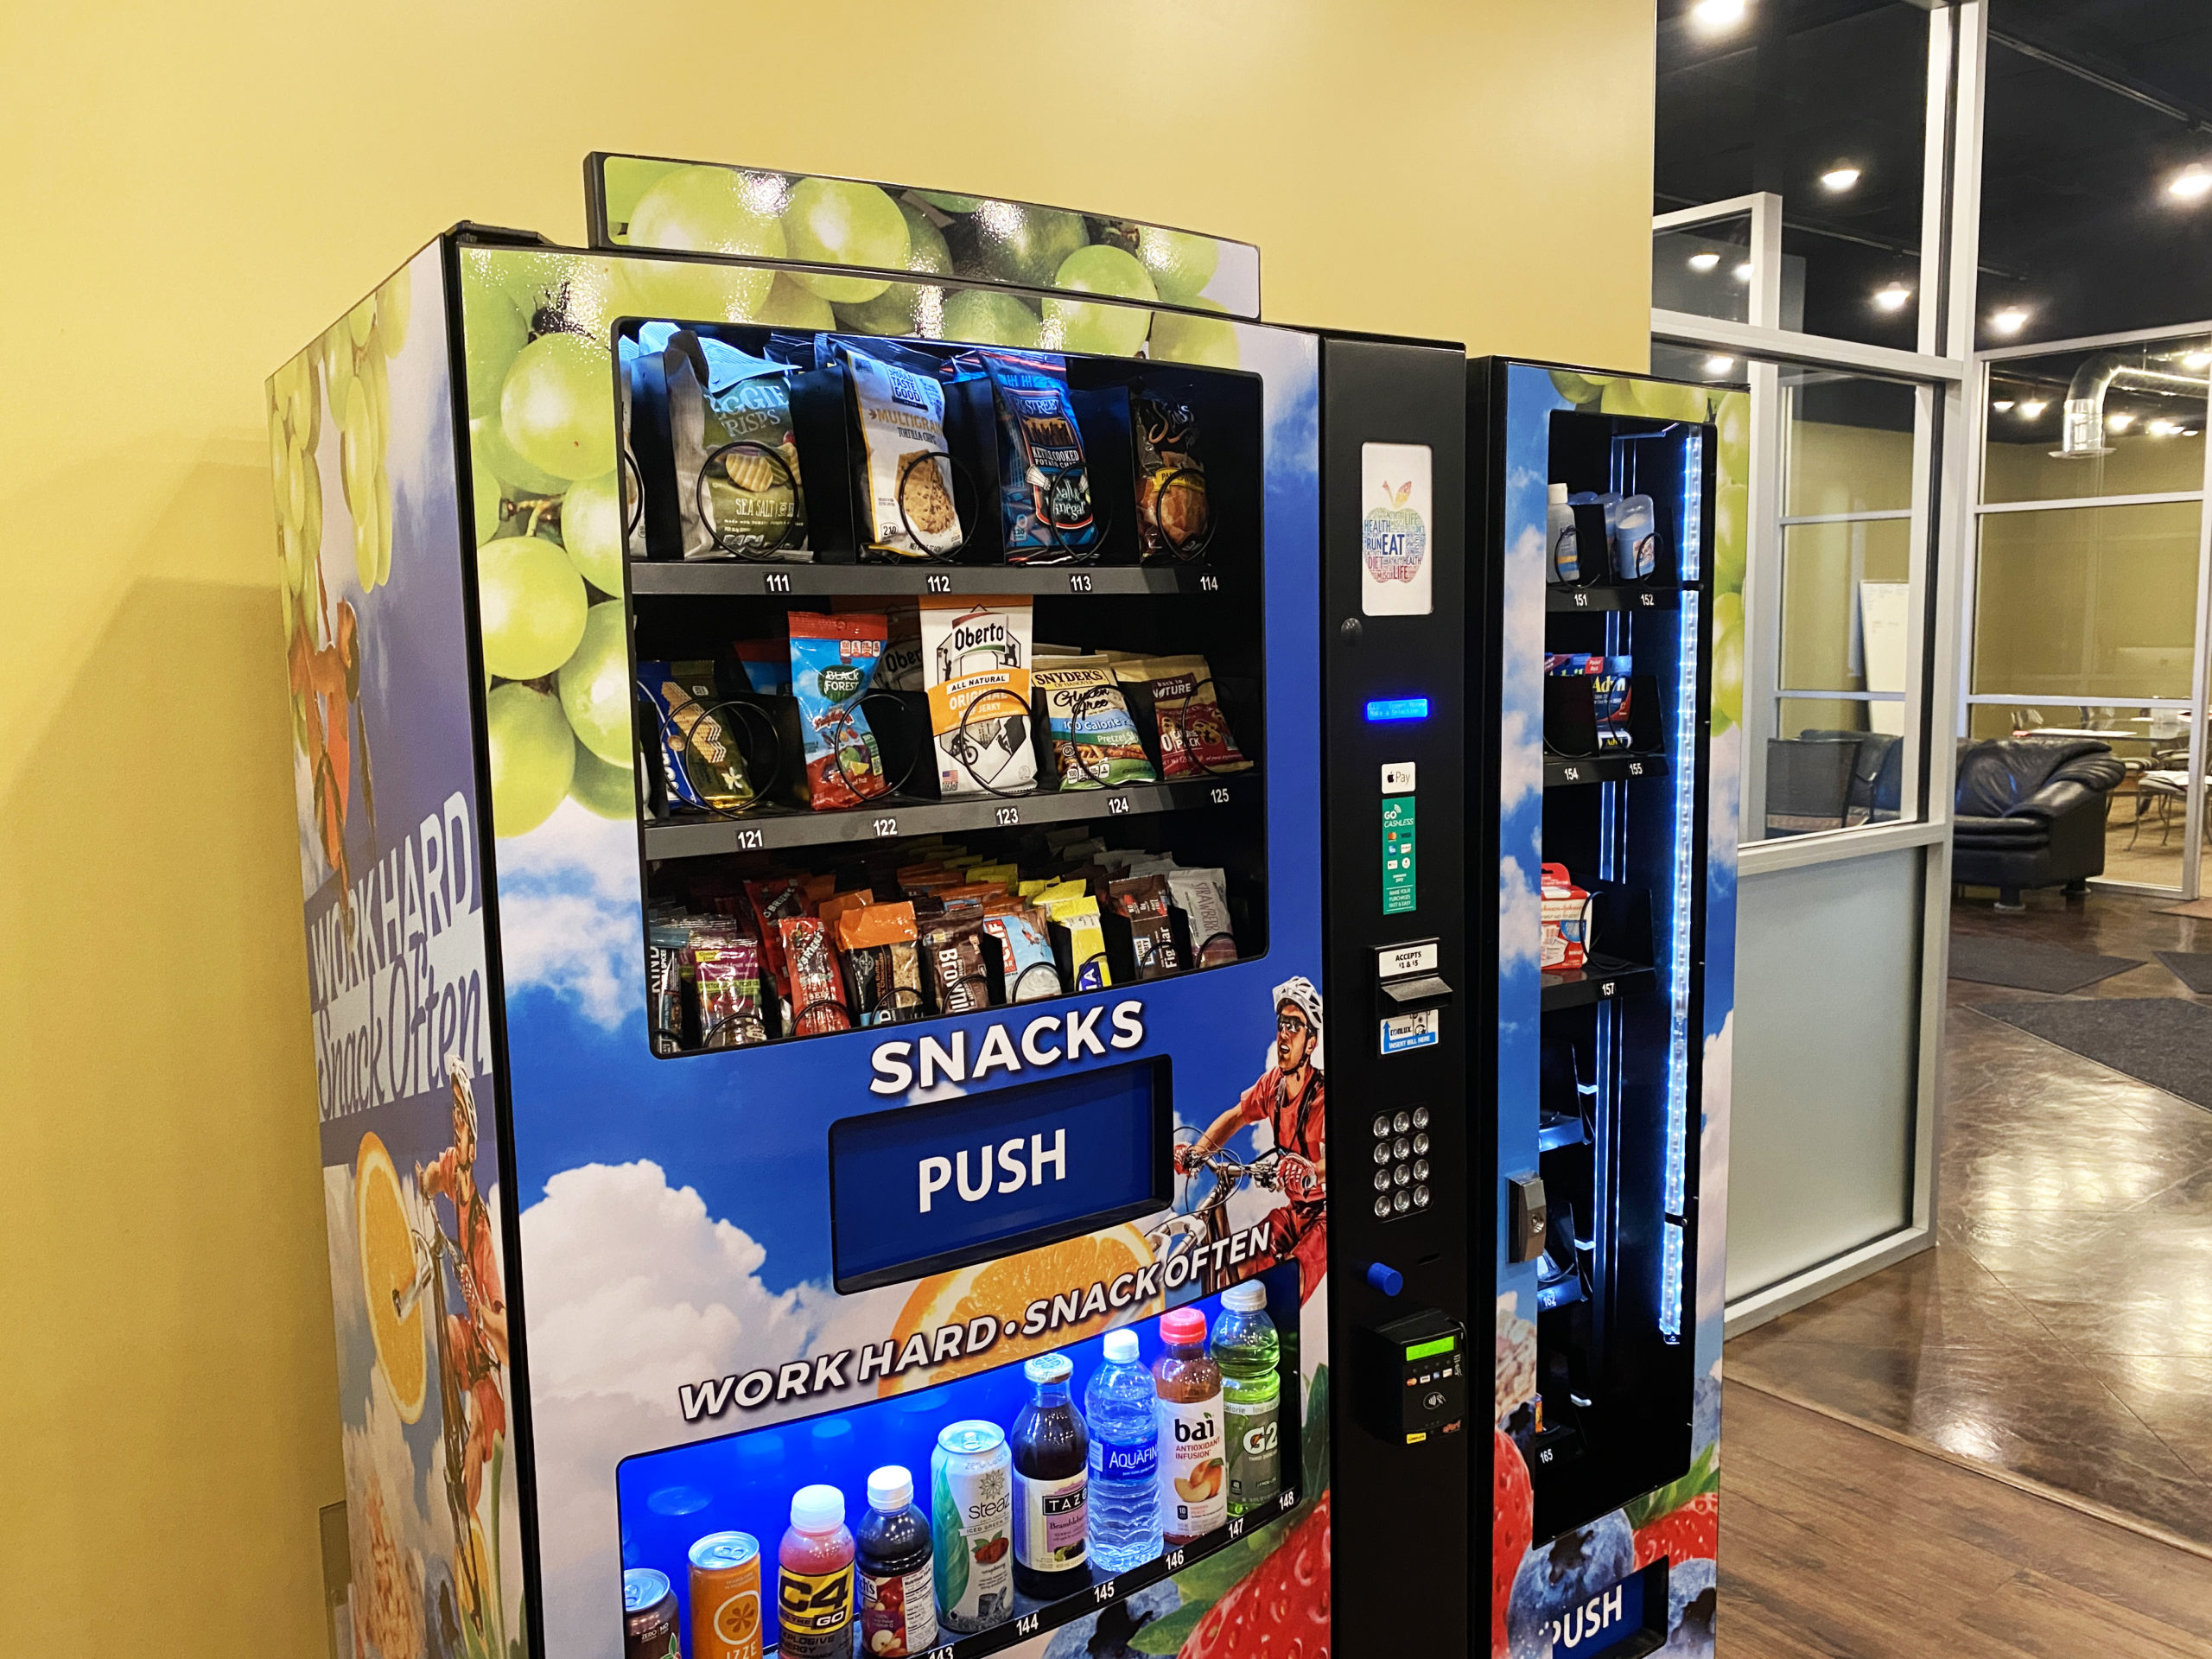 https://www.healthyyouvending.com/wp-content/uploads/HYV-Machine-in-FG-Office_lr-scaled.jpg